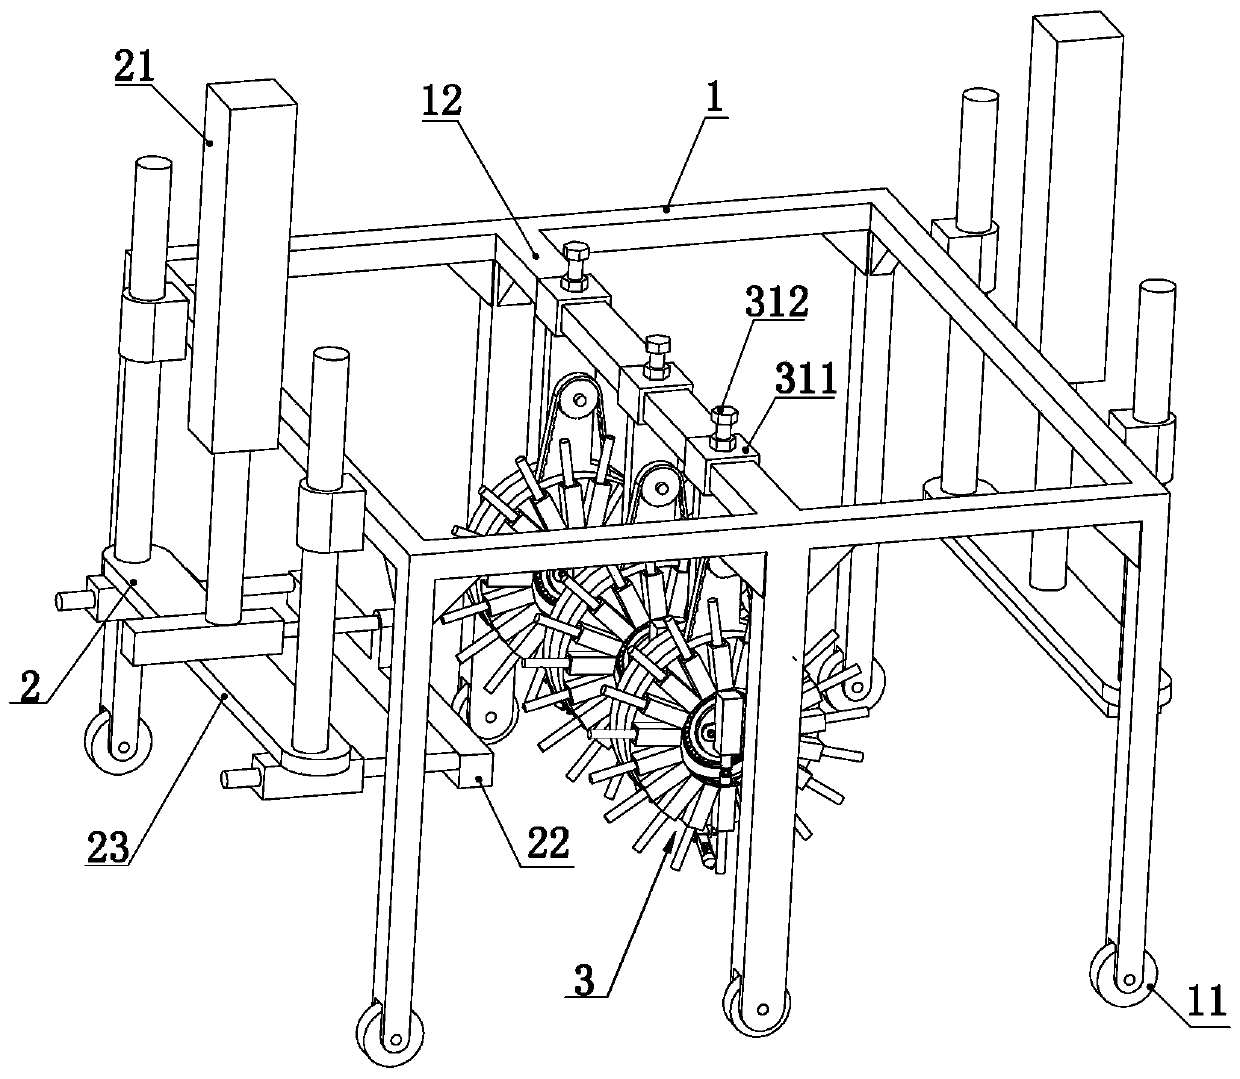 A device for welding screw groups in the shipbuilding process